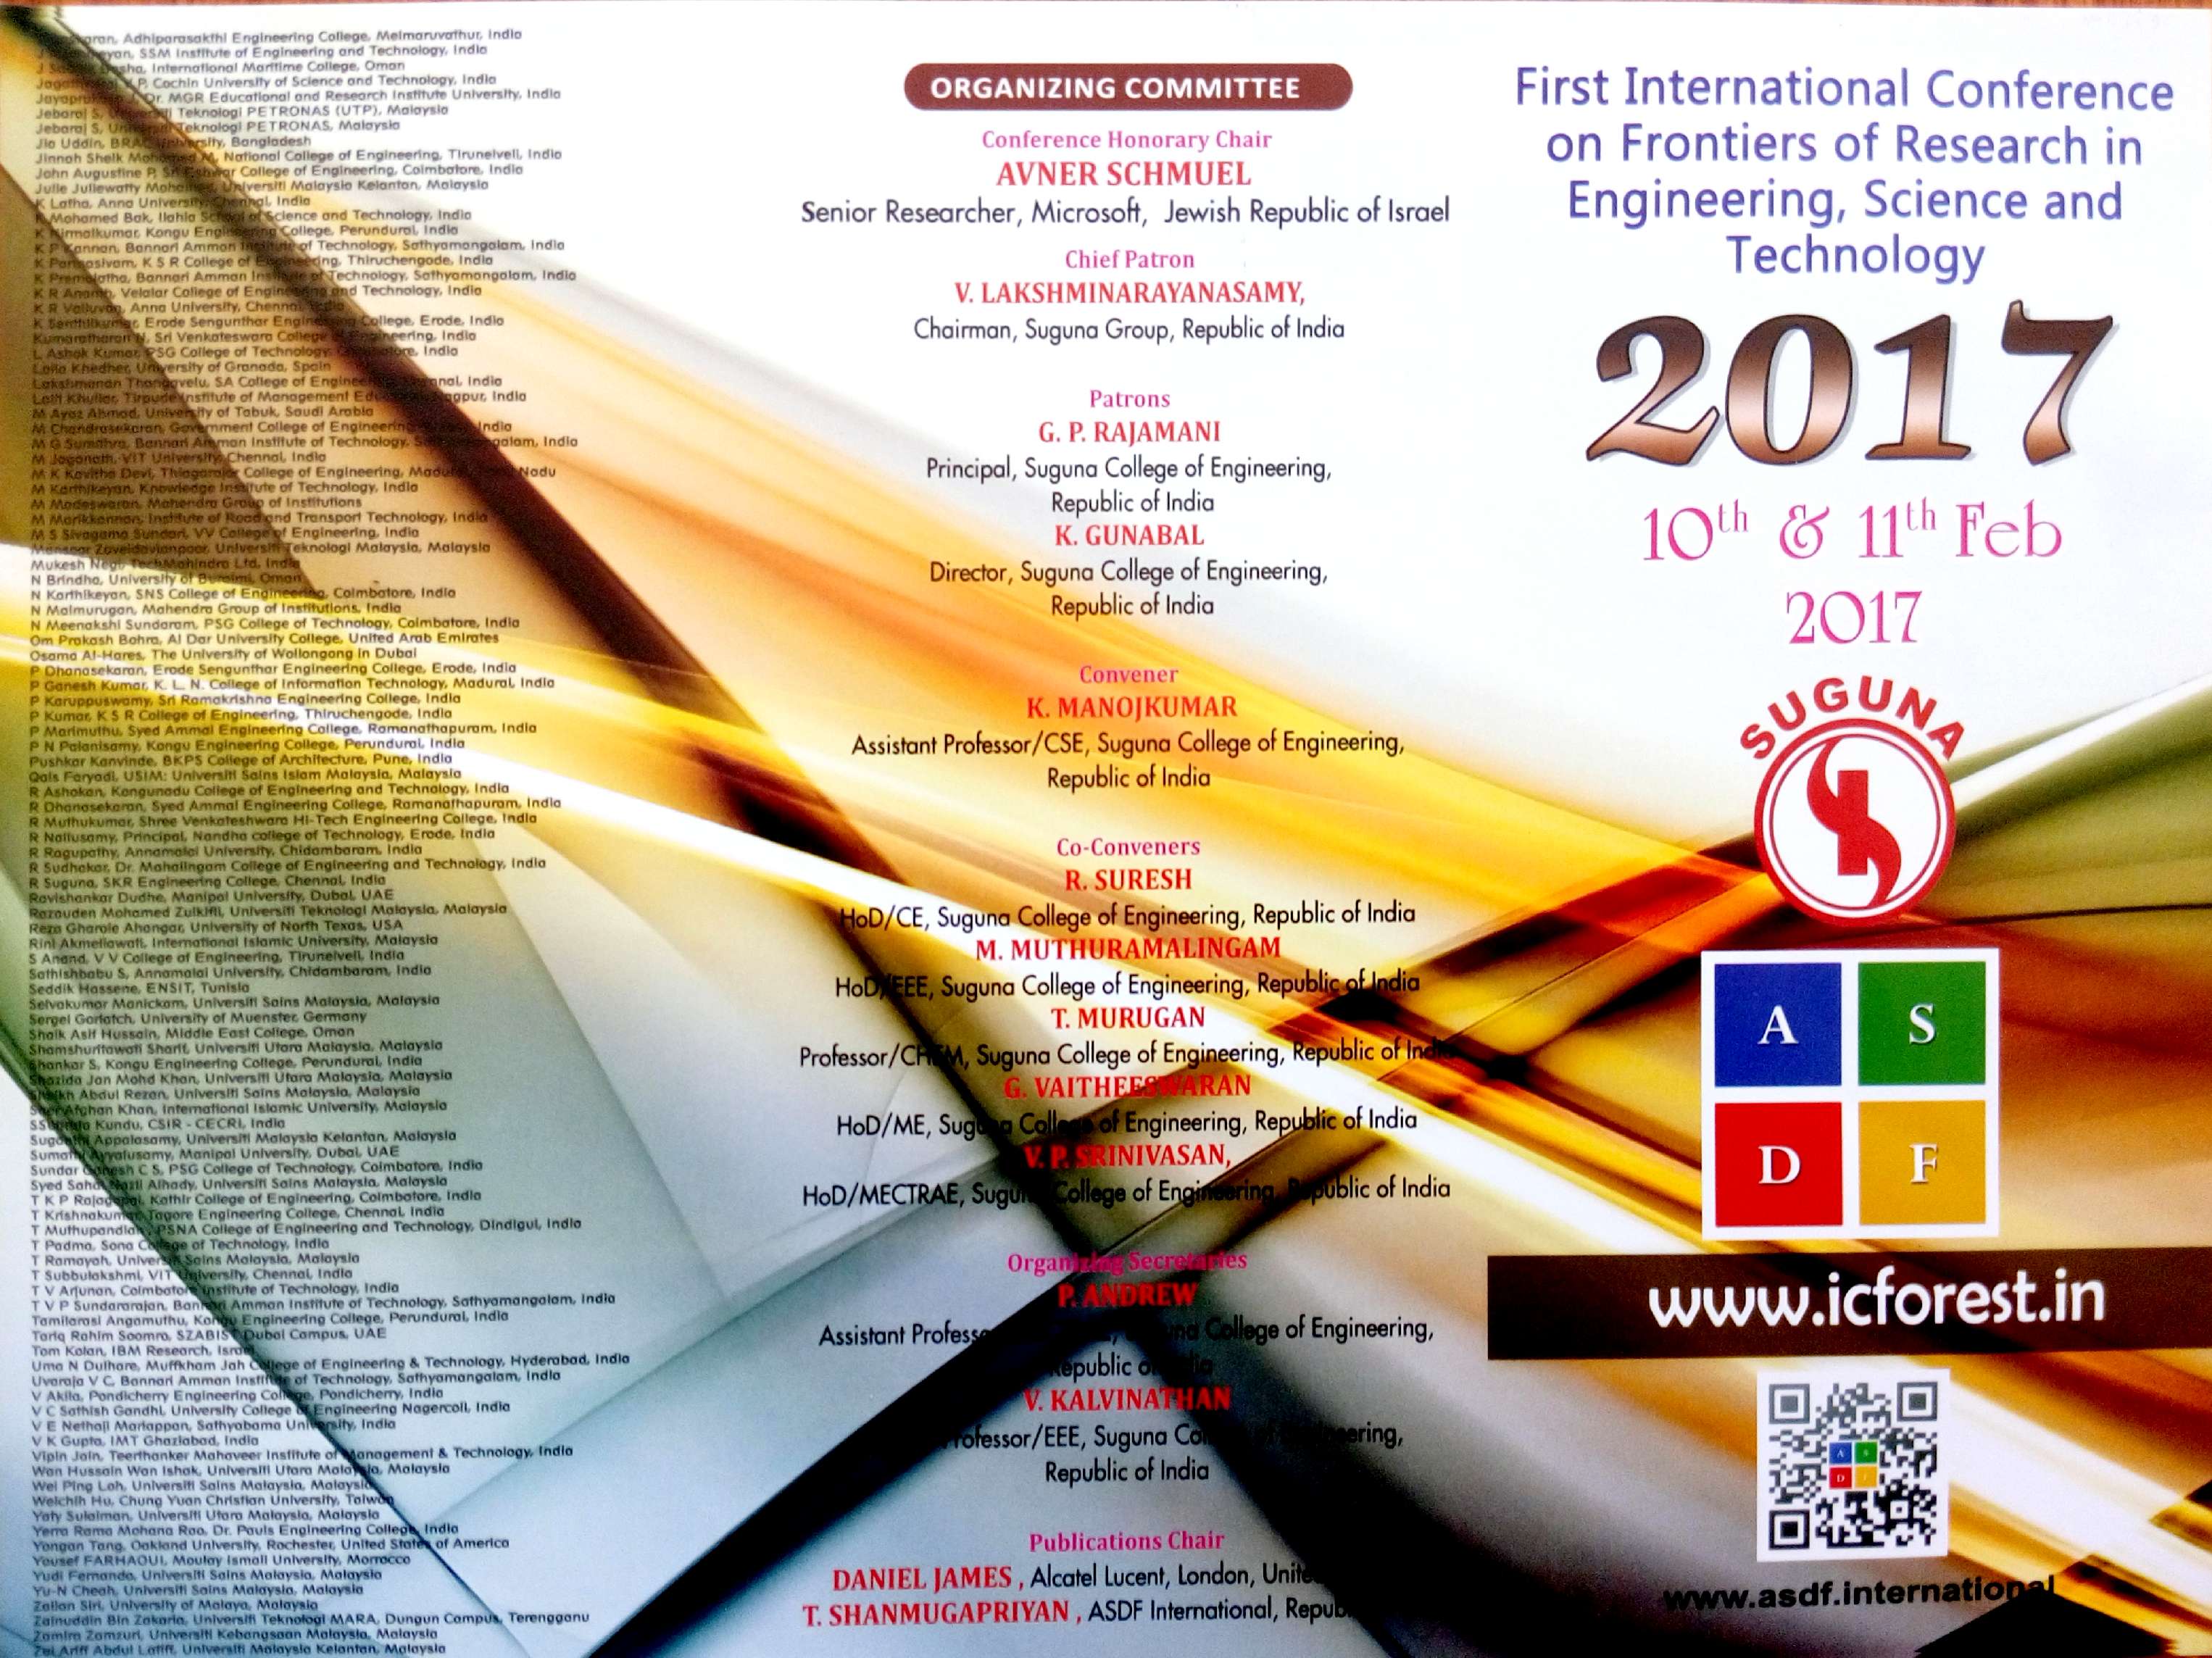 International Conference on Frontiers Of Research in Engineering, Science and Technology, Coimbatore, Tamil Nadu, India